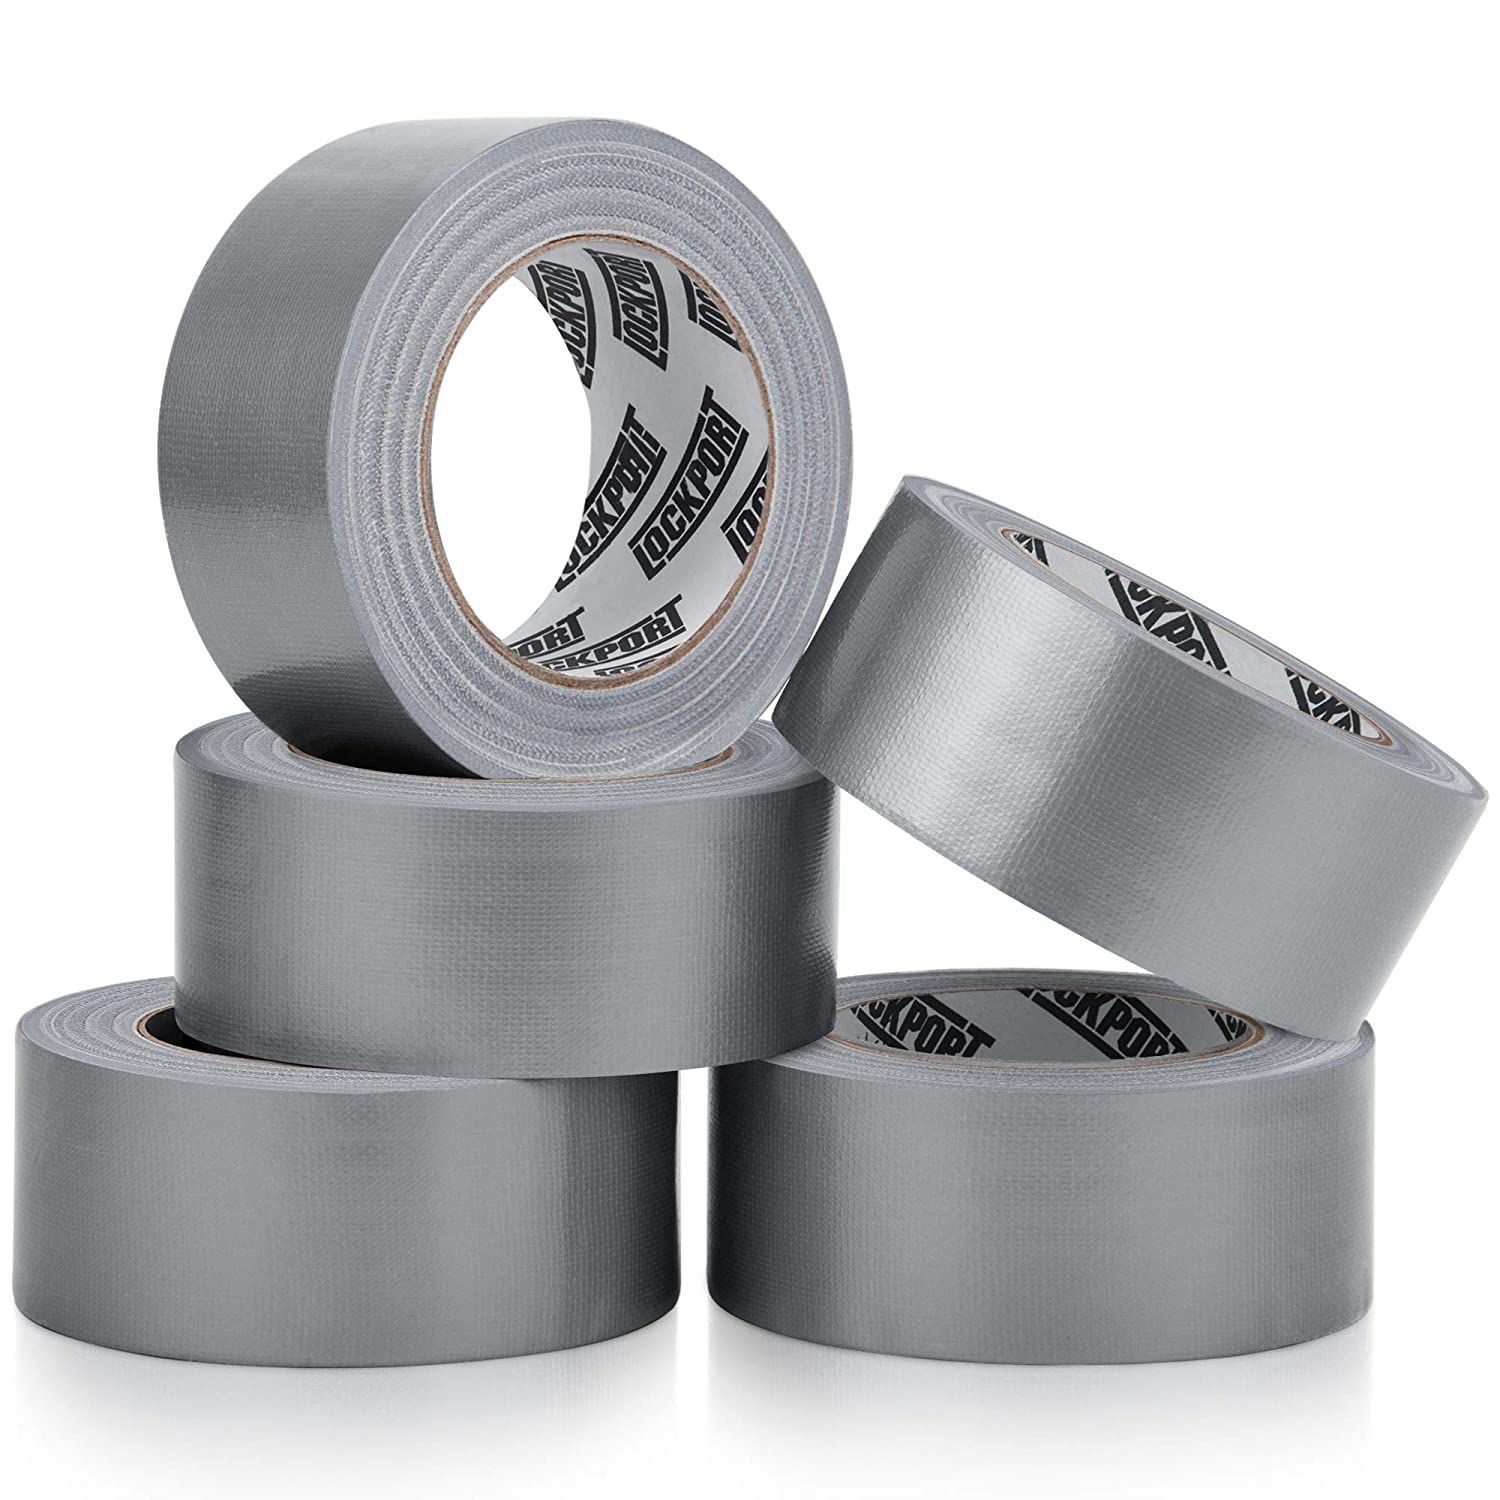 Surprising Uses for Duct Tape  Duct tape, Duct tape colors, Duct